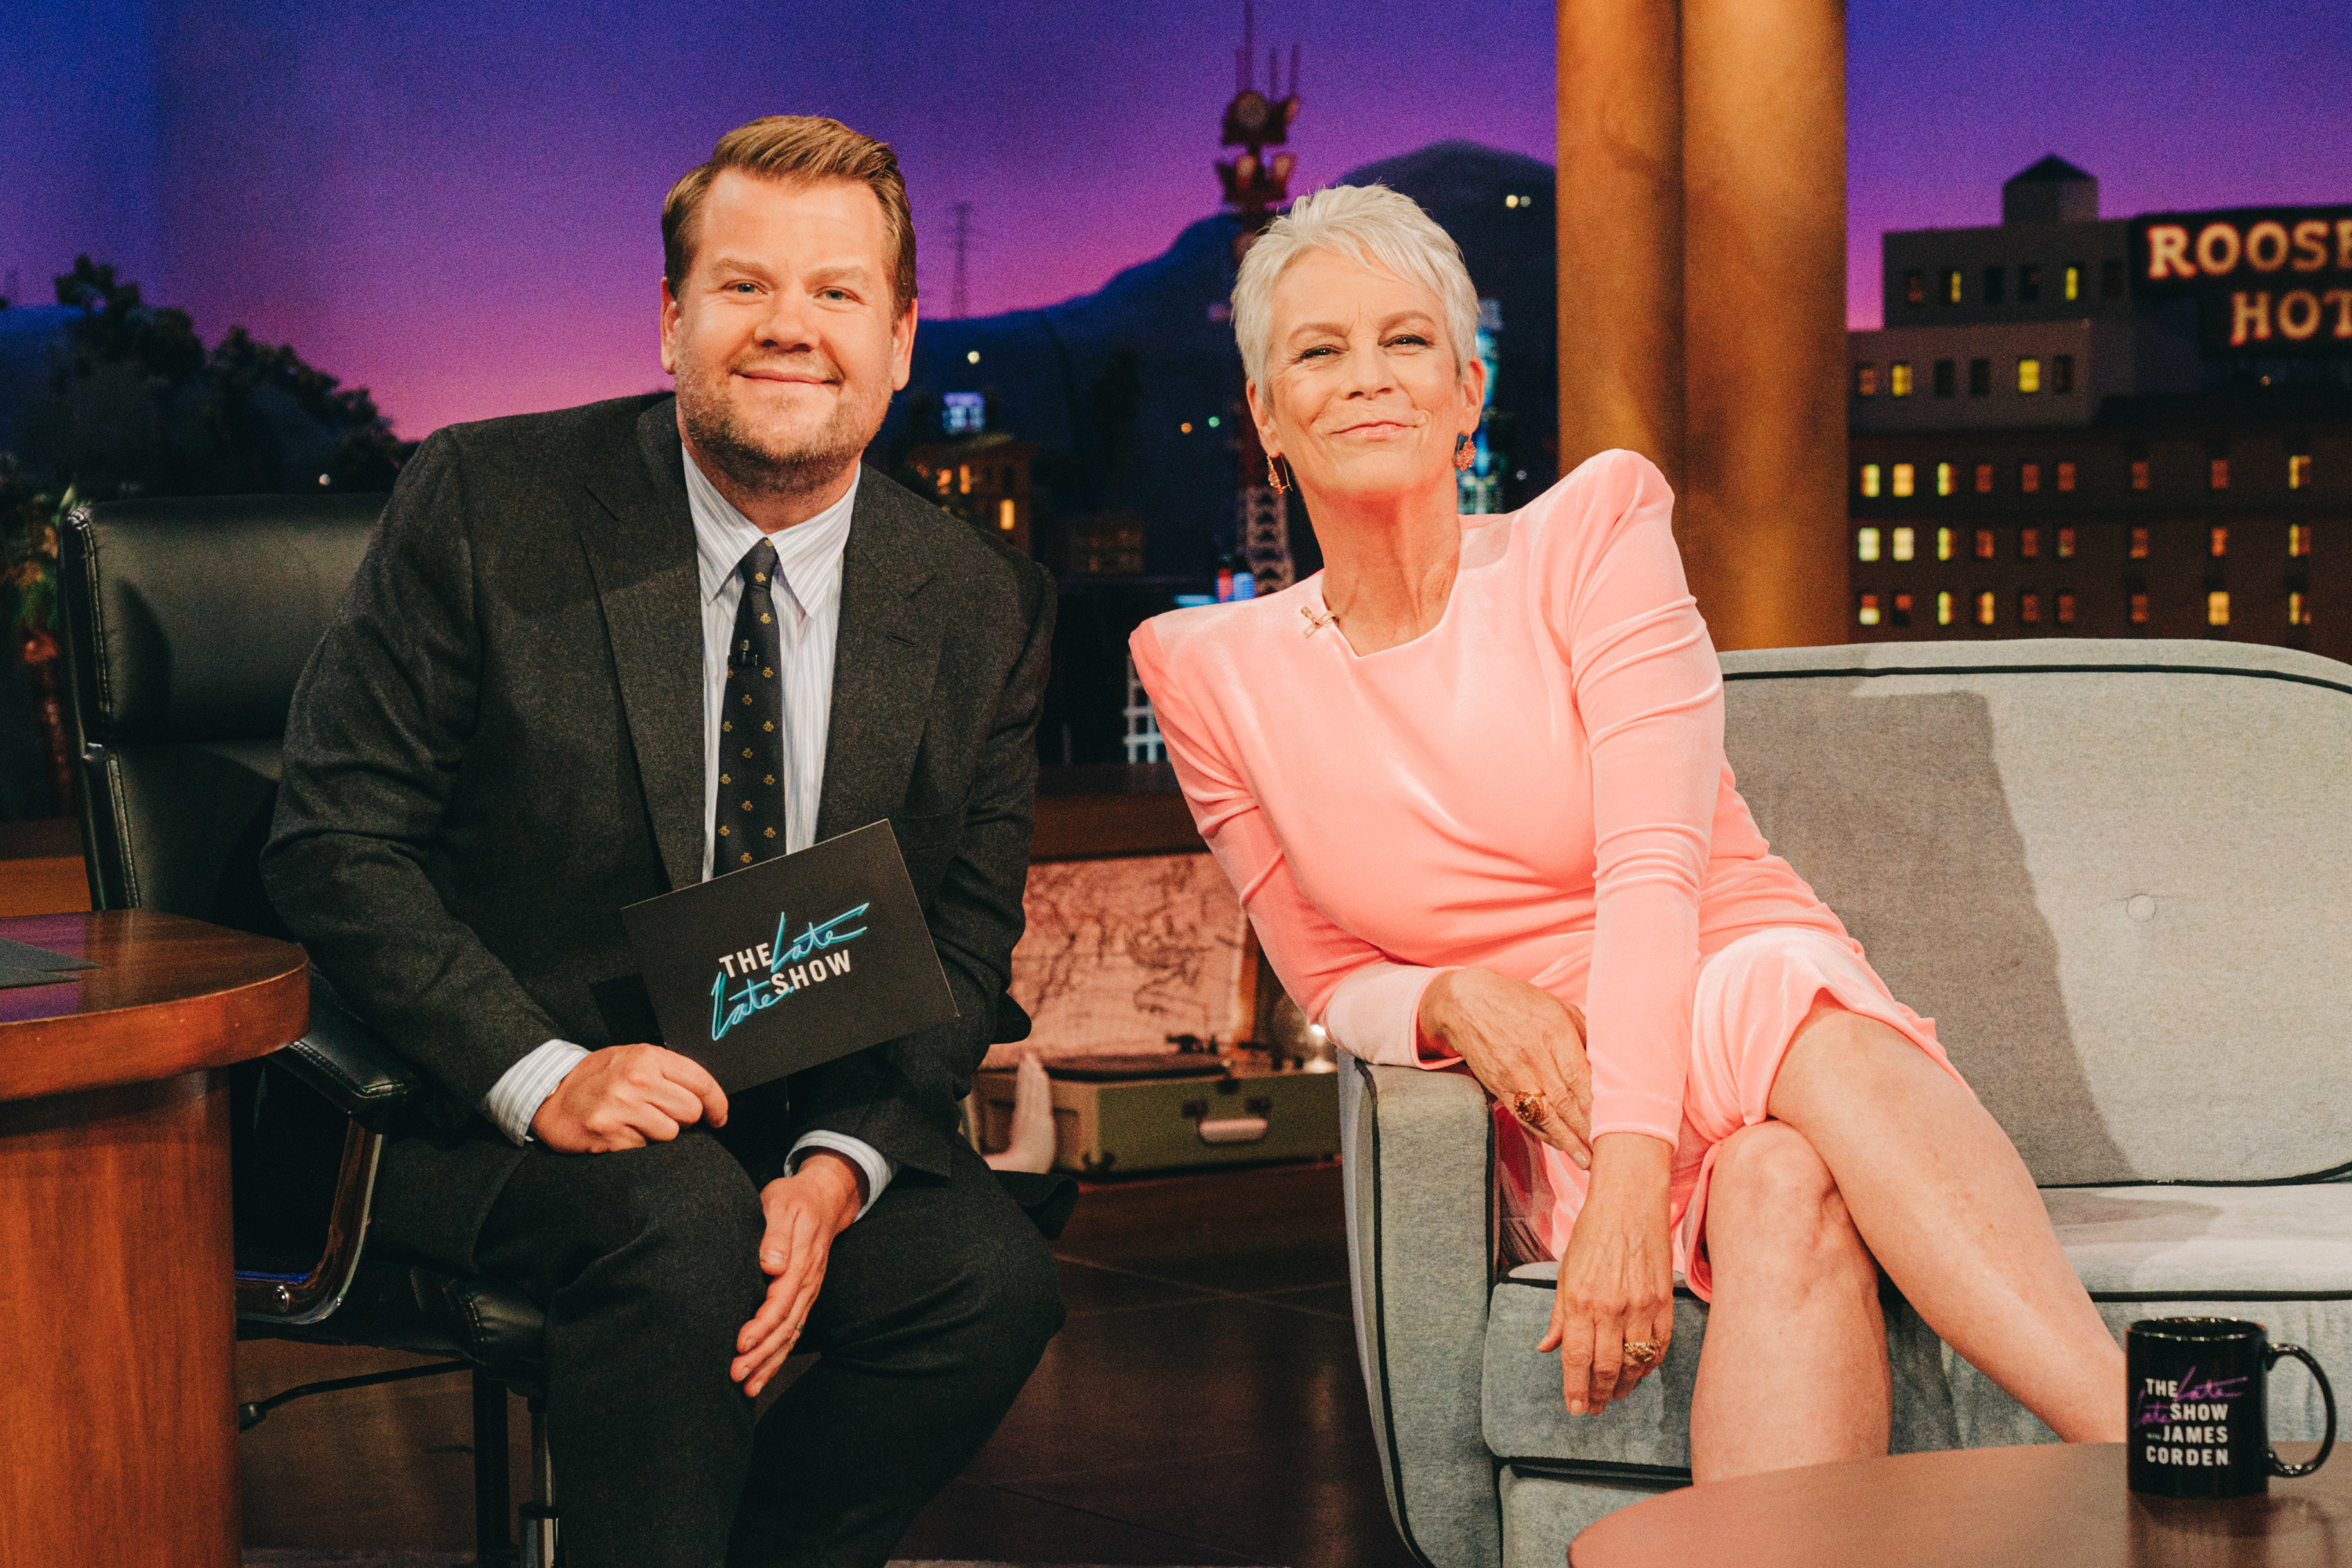 James Corden and Jamie Lee Curtis on "The Late Late Show with James Corden." This episode aired on Monday, October 4, 2021. | Source: Getty Images